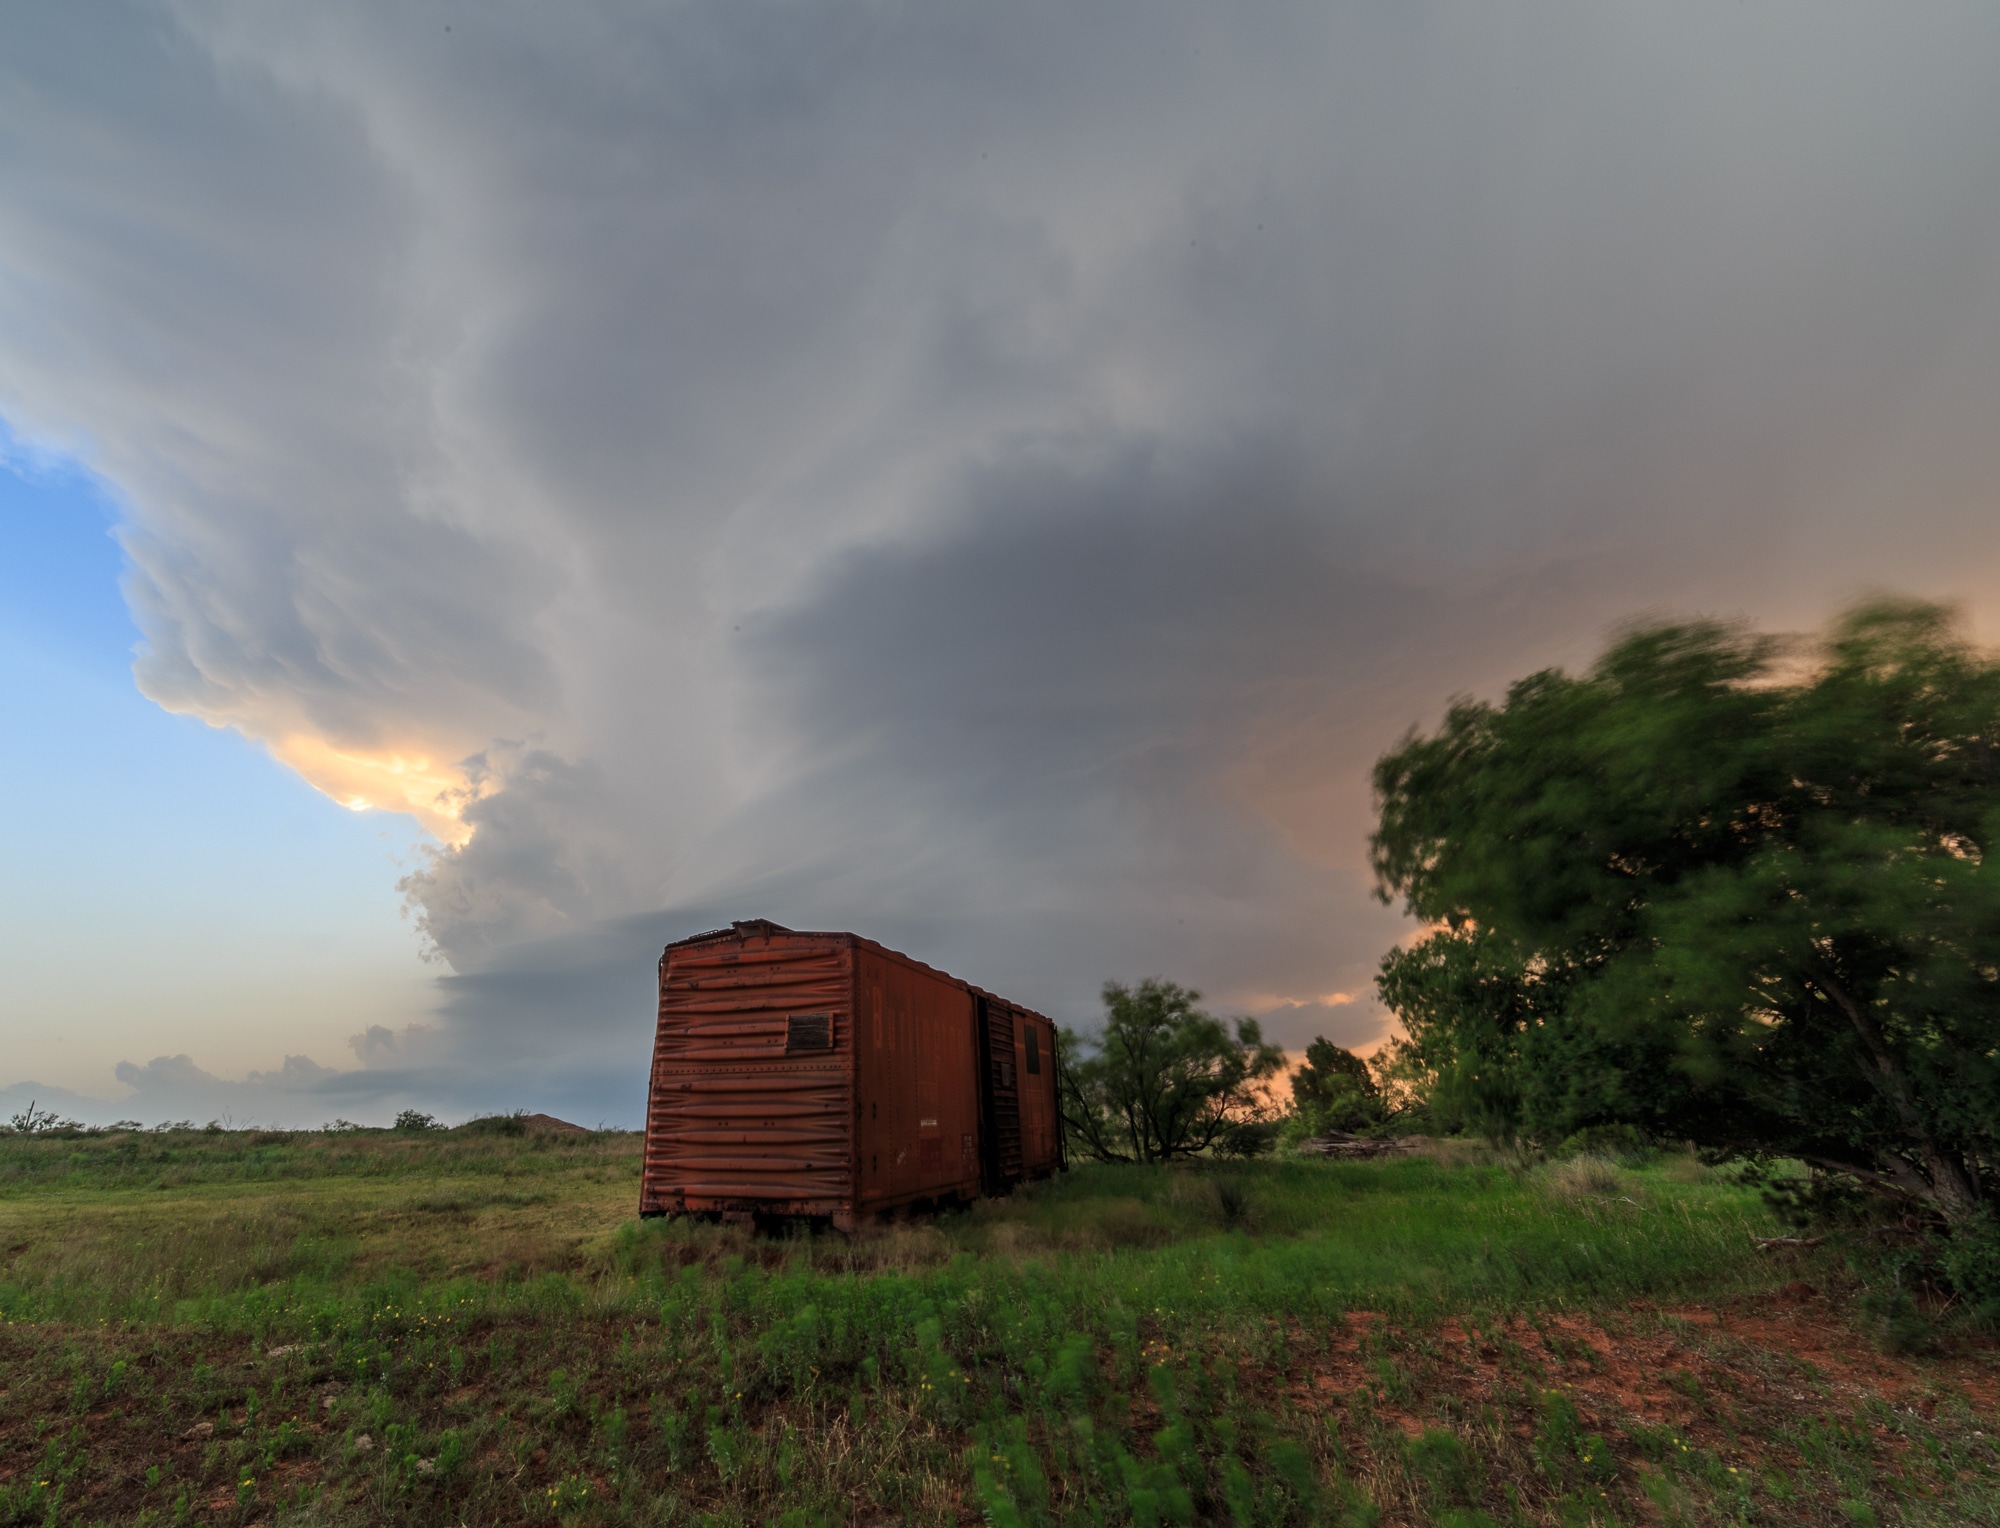 Boxcar in front of a supercell